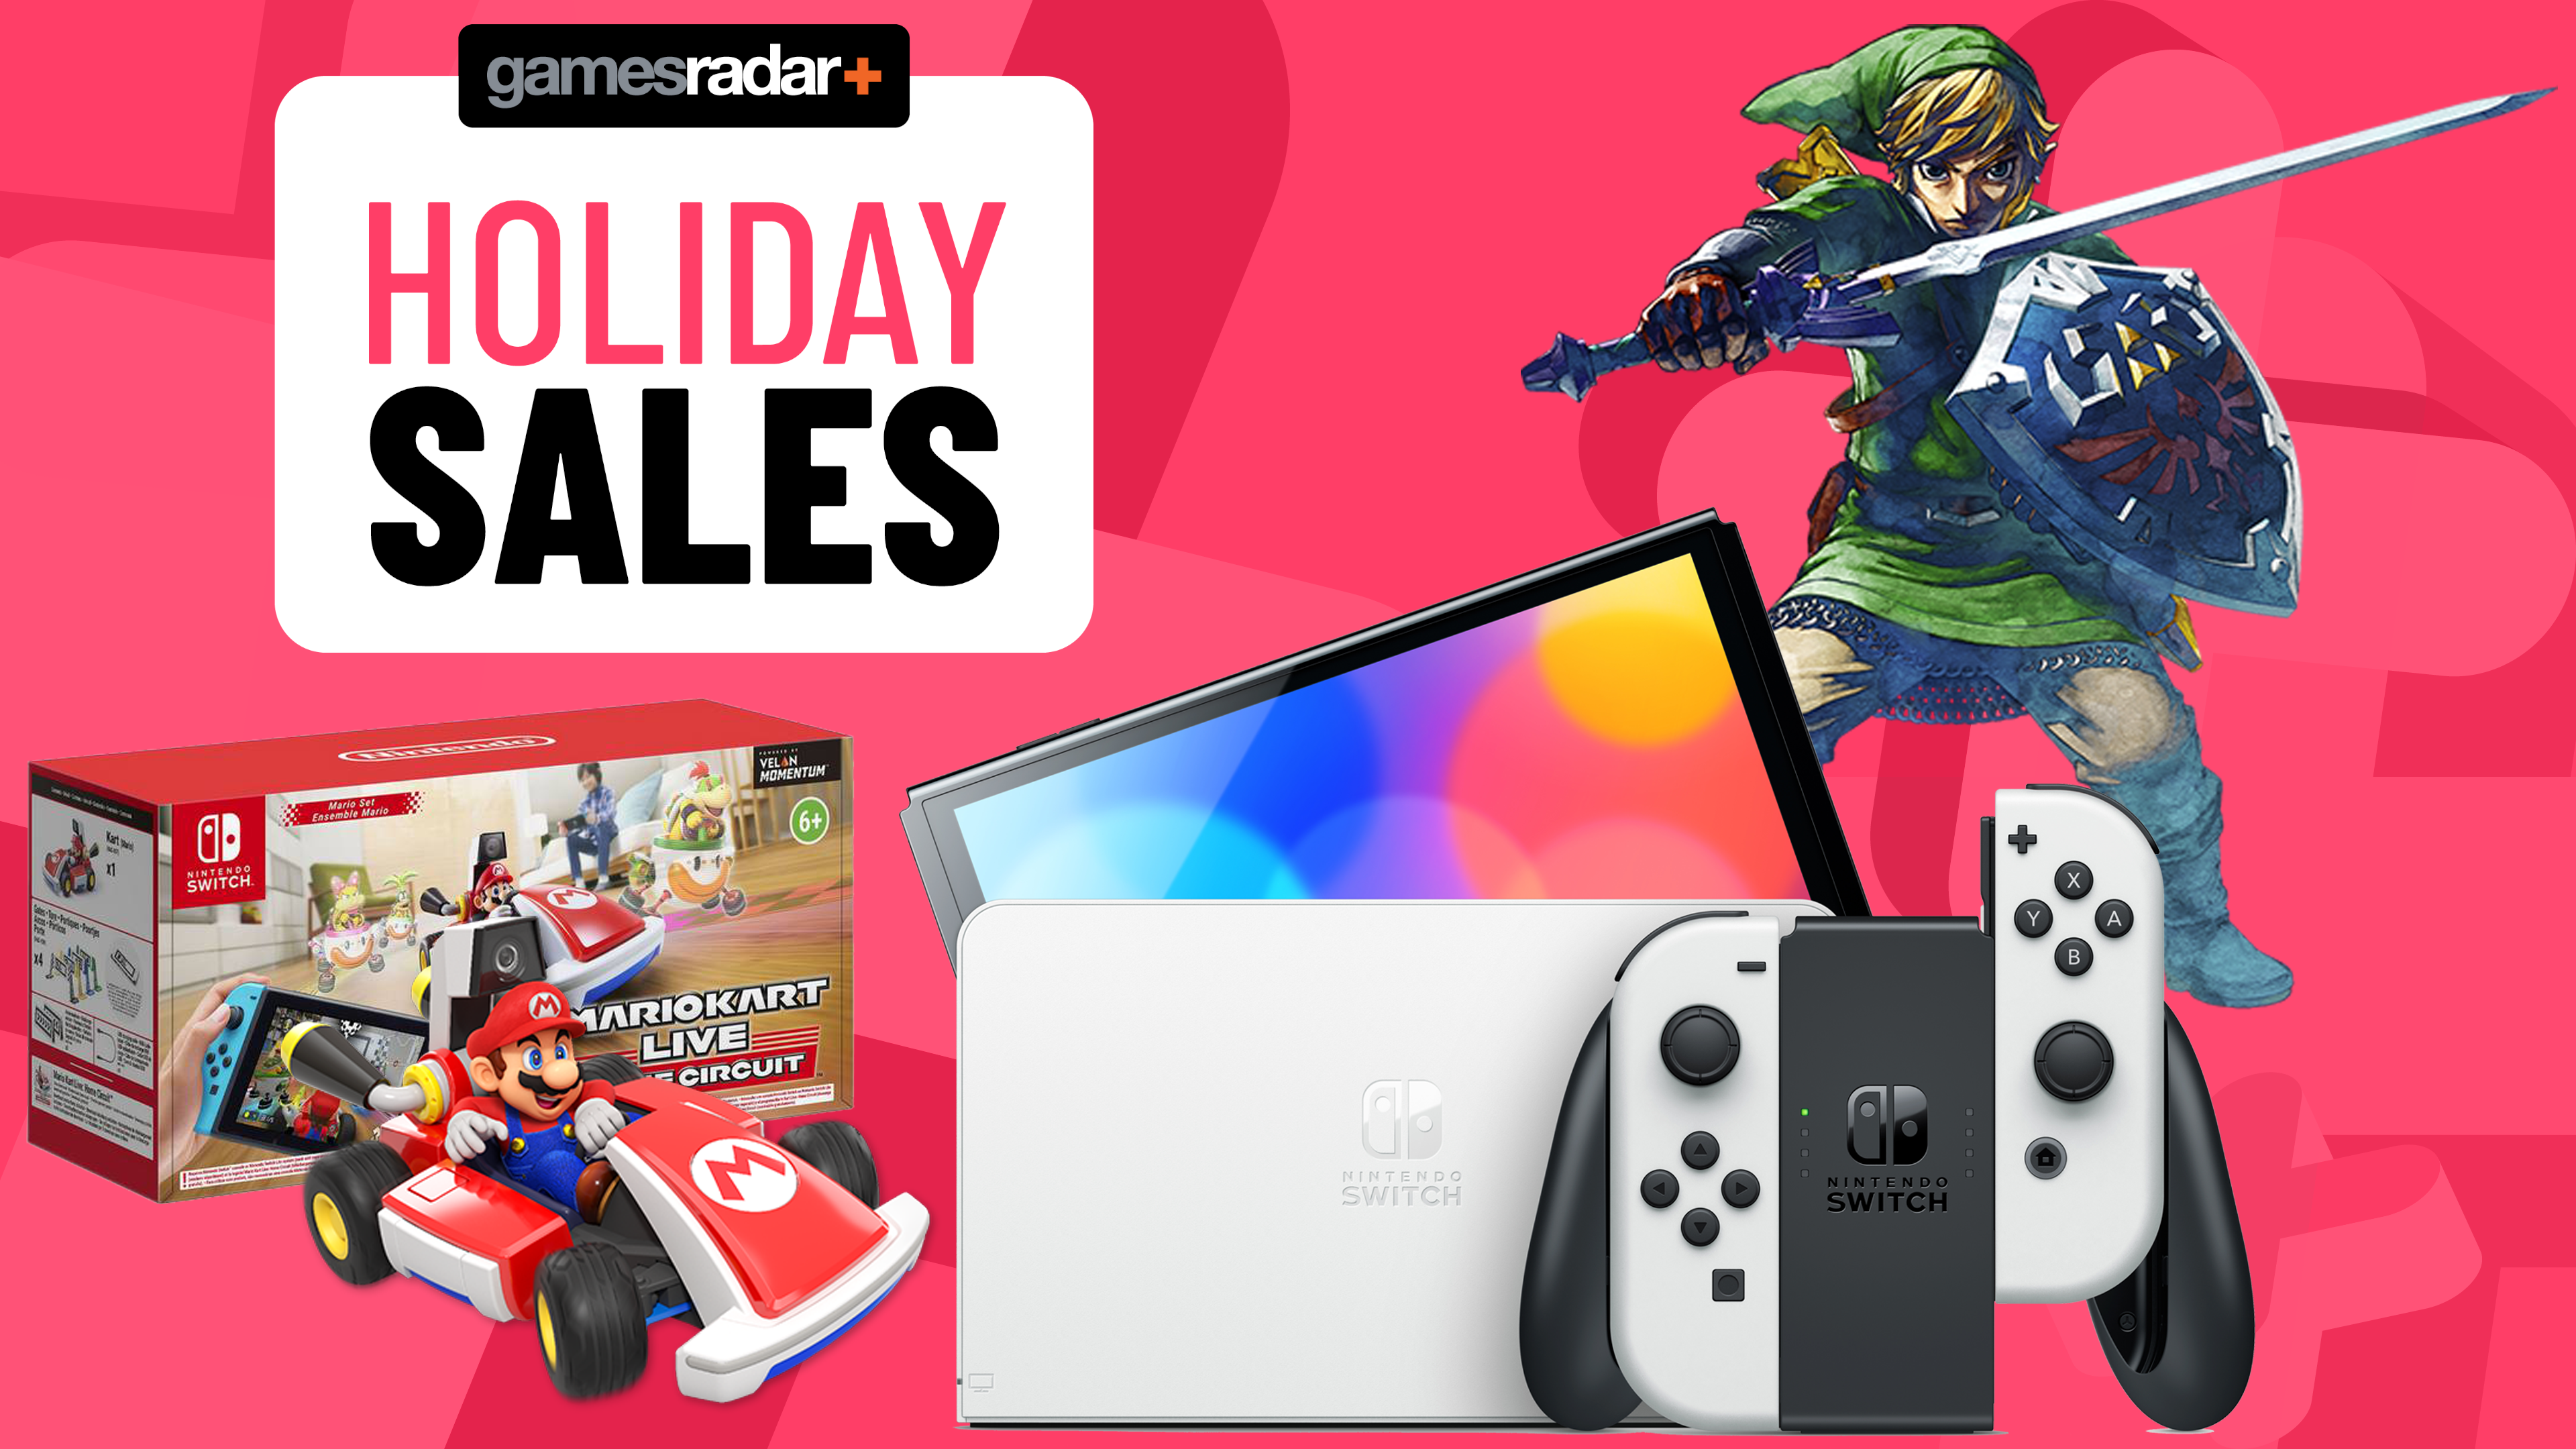 This Nintendo Switch OLED bundle is one of the best Black Friday